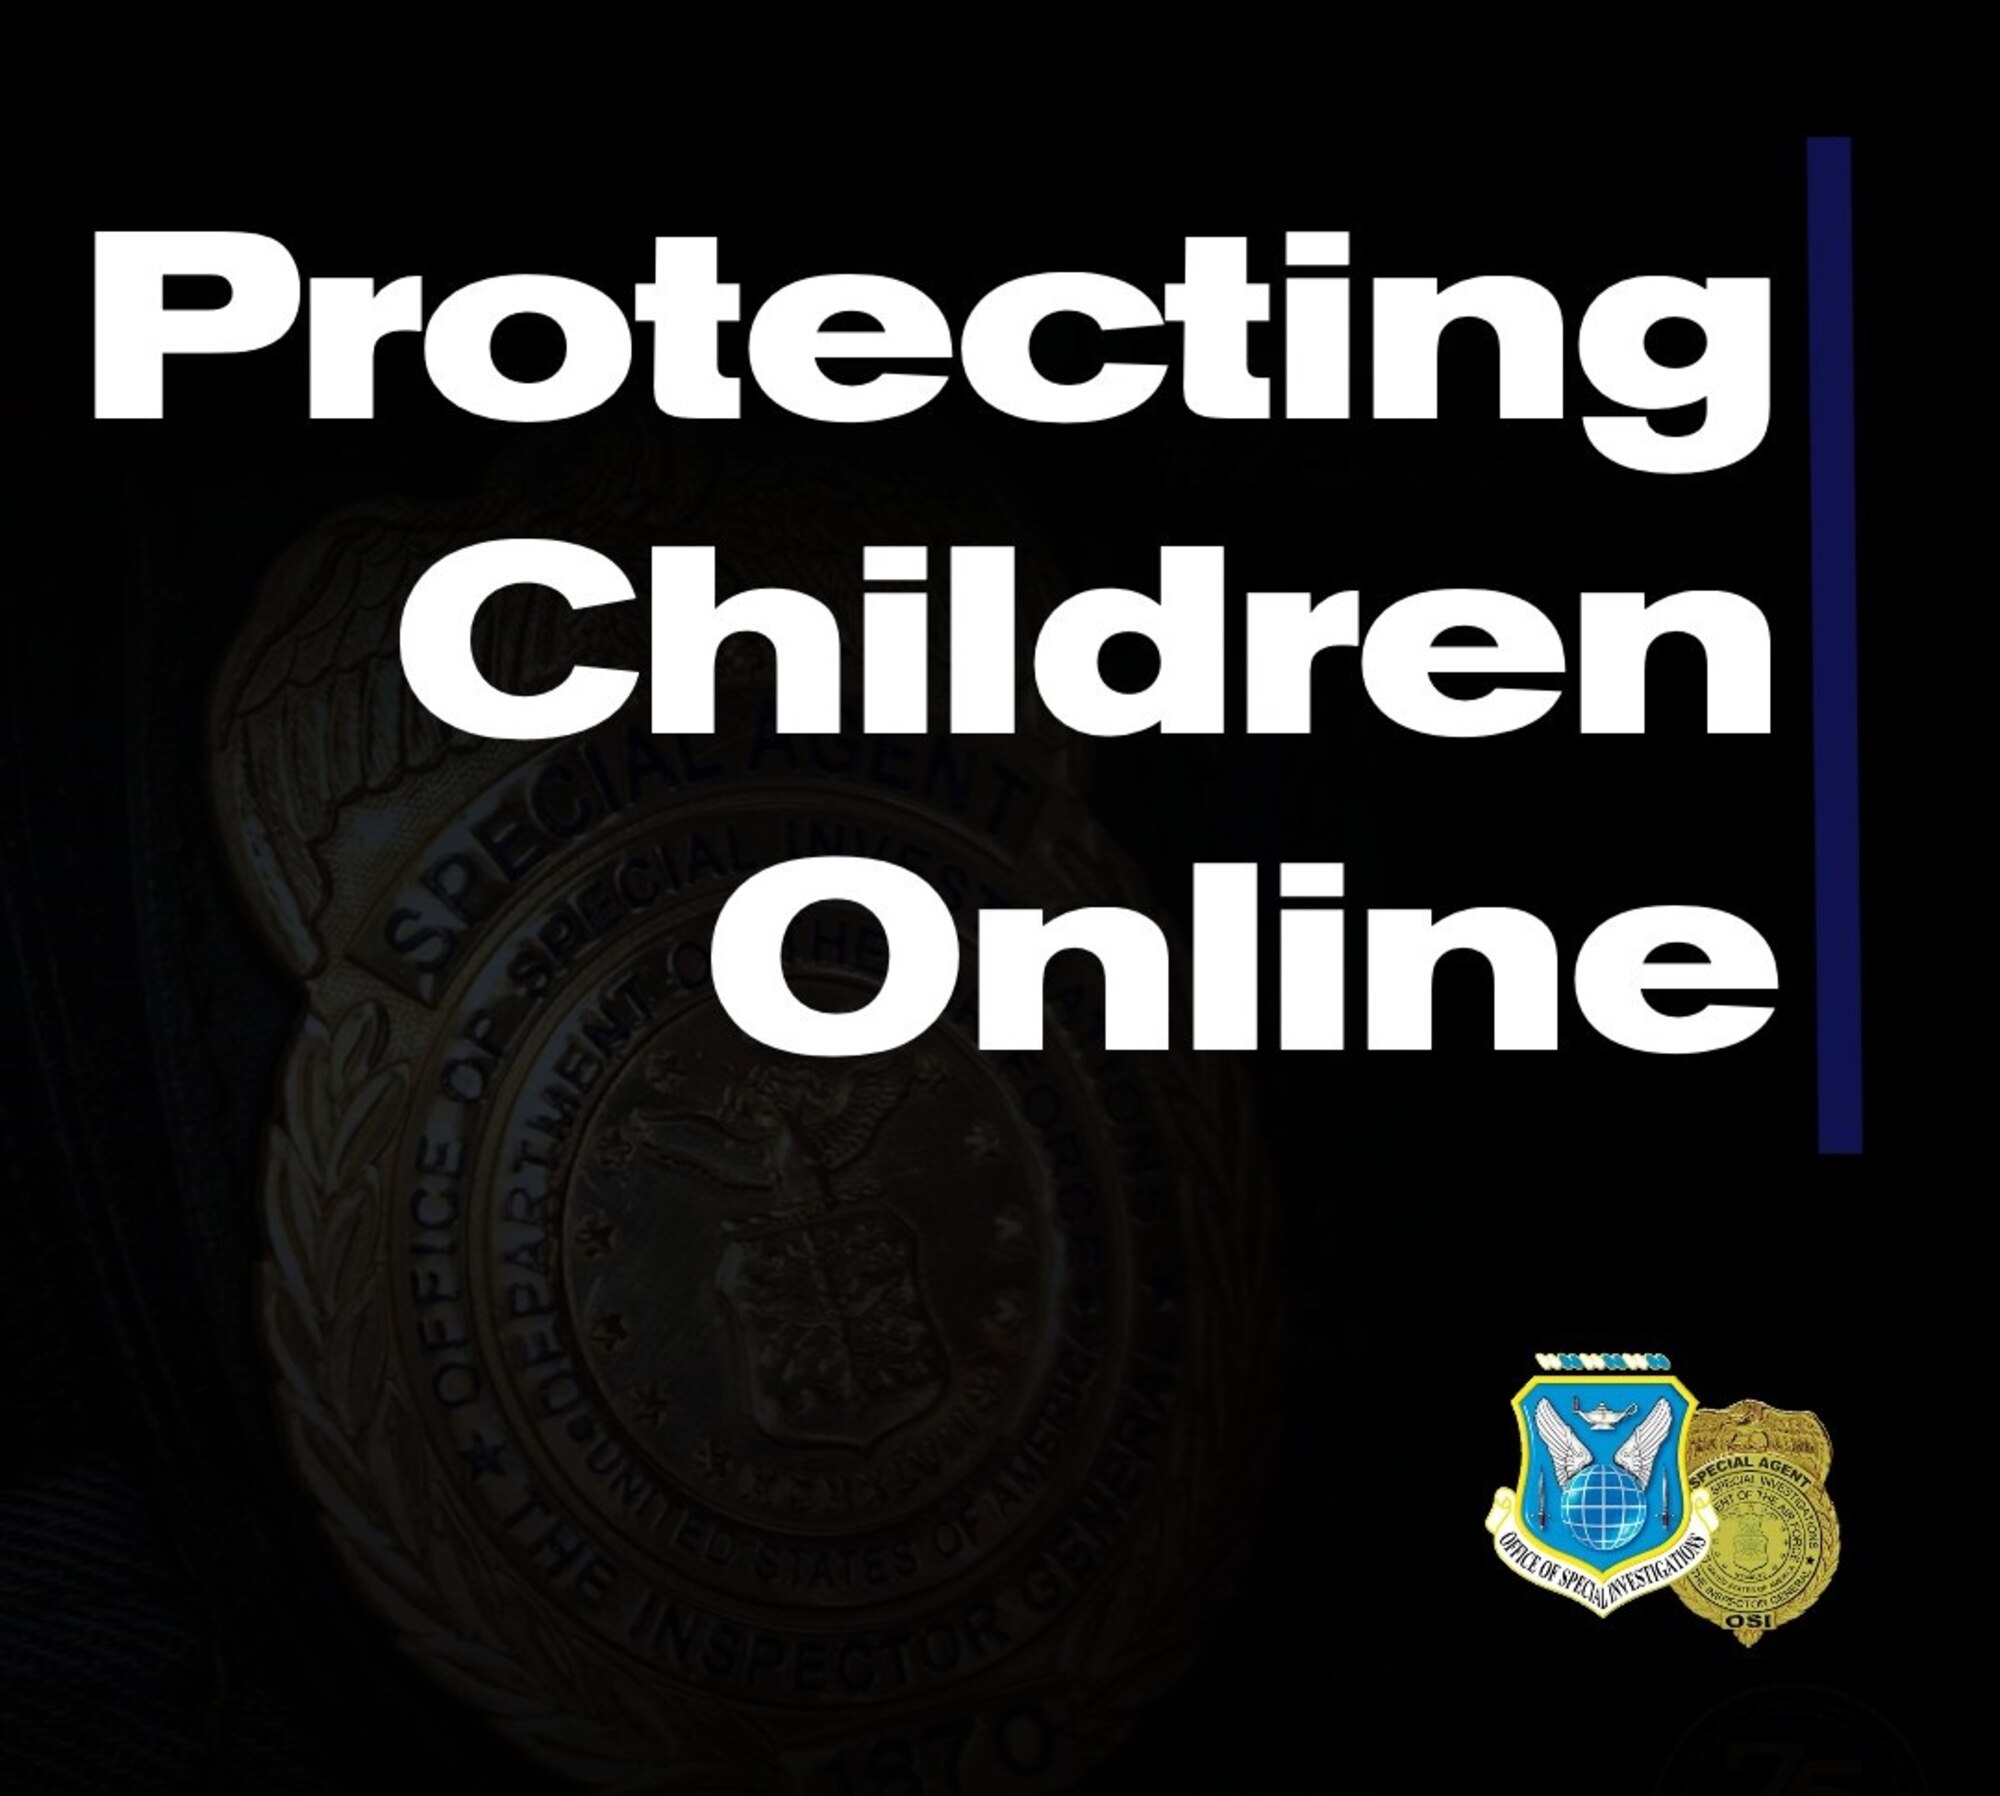 Protecting Children Online (Graphic by Thomas Brading, OSI/PA)